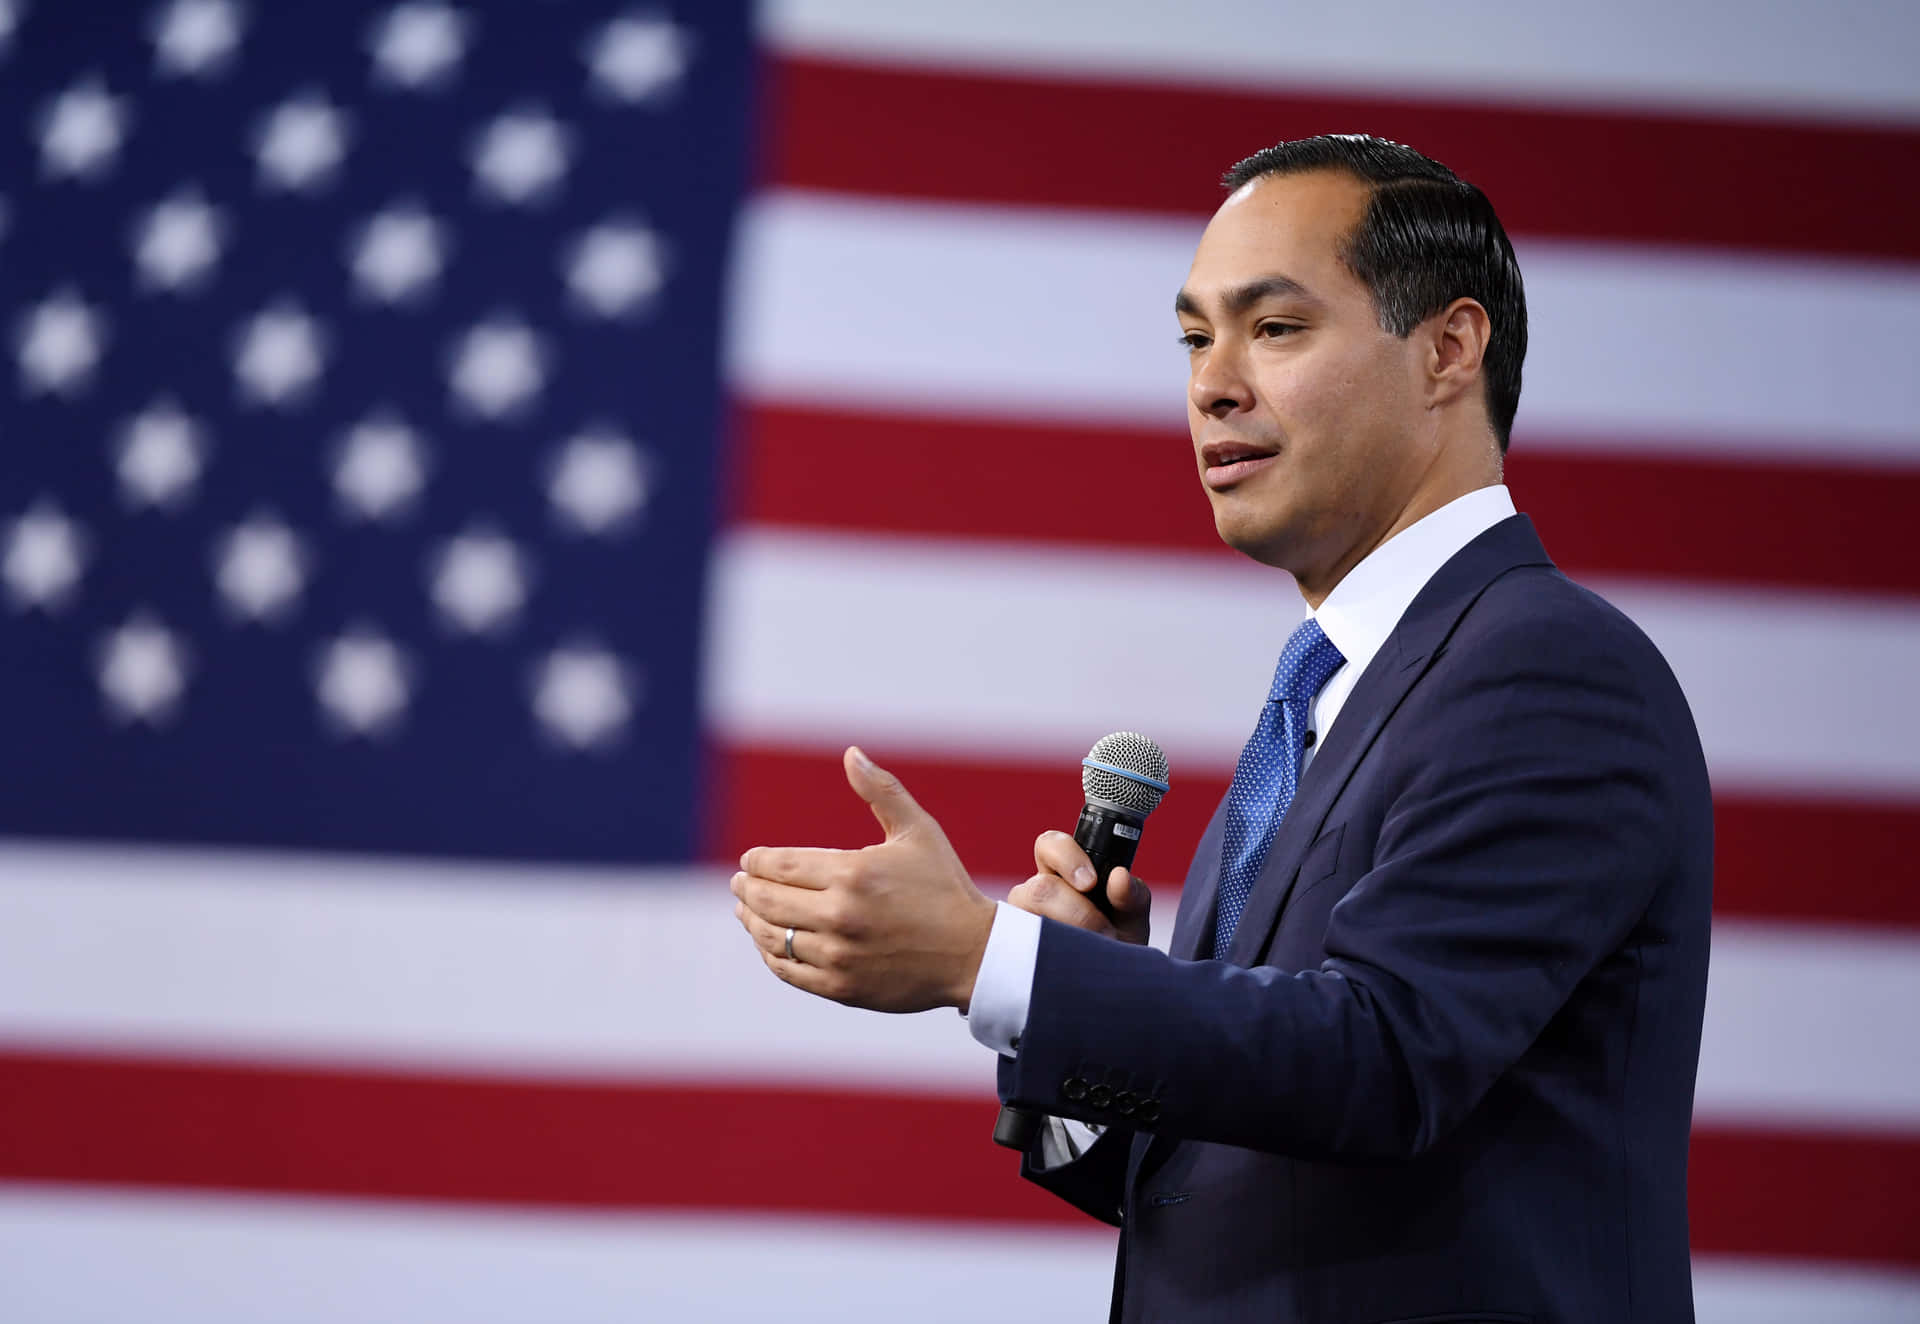 Julian Castro With American Flag Background Wallpaper